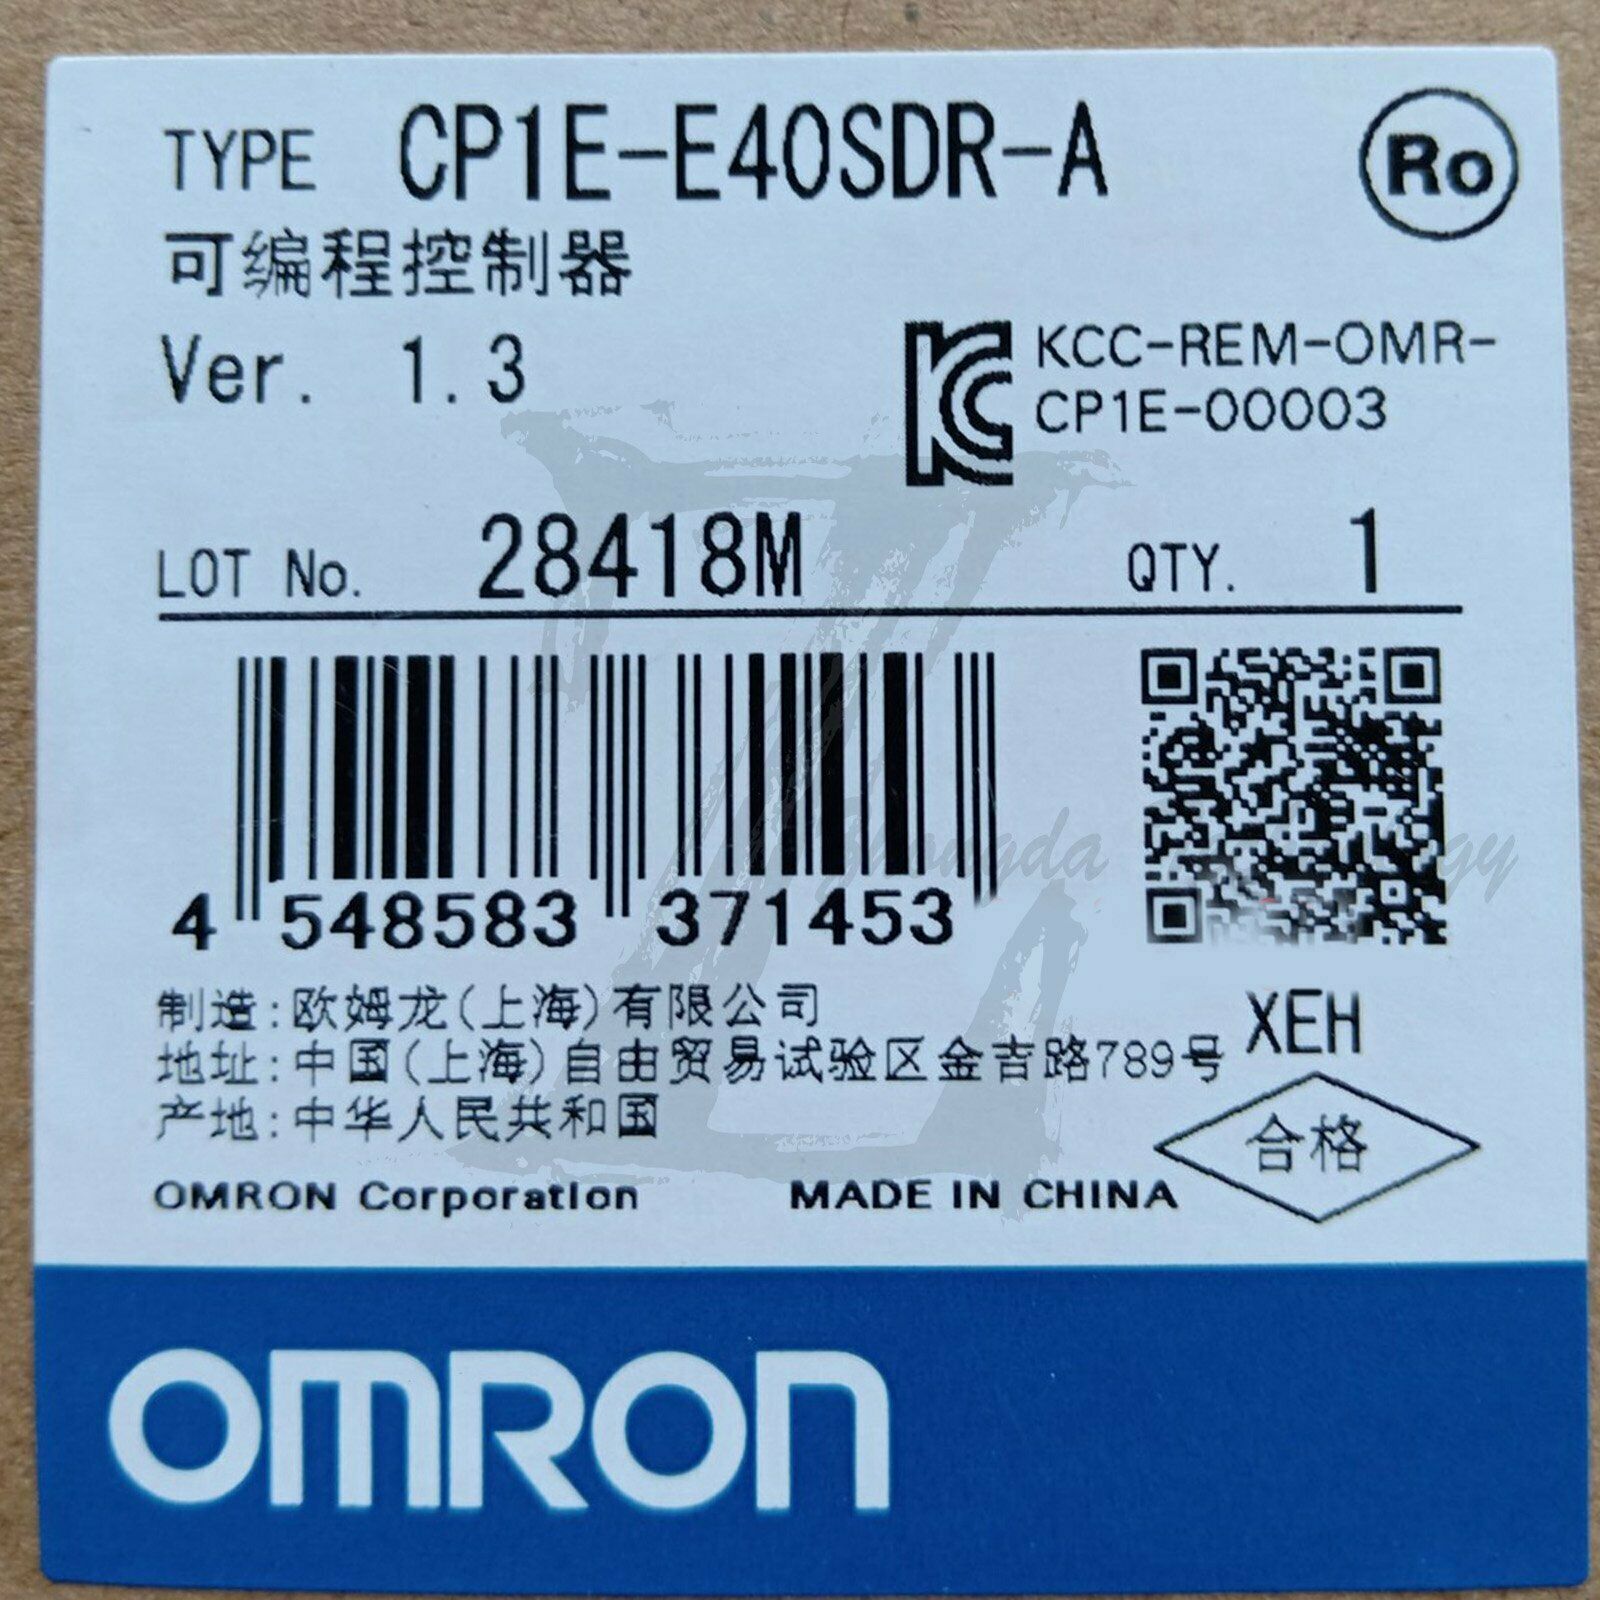 1pc new Omron programmable controller CP1E-E40DR-A one year warranty KOEED 101-200, 80%, import_2020_10_10_031751, Omron, Other